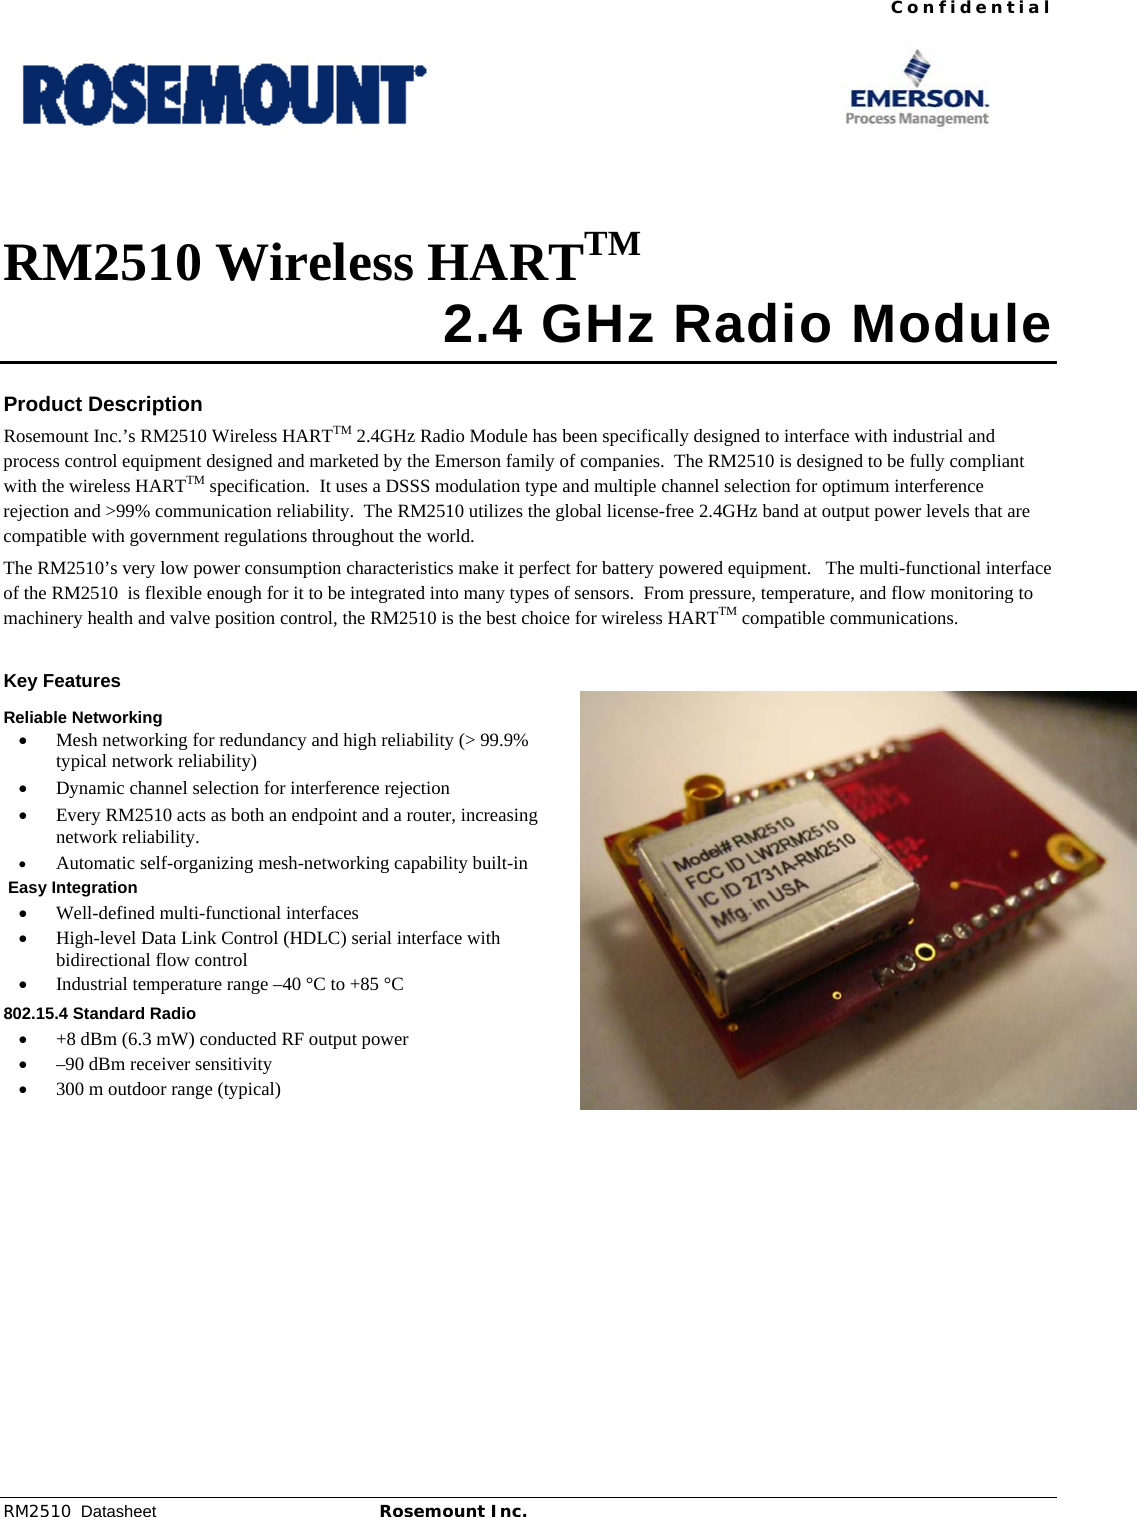  Confidential RM2510  Datasheet Rosemount Inc.  1           RM2510 Wireless HARTTM  2.4 GHz Radio Module  Product Description Rosemount Inc.’s RM2510 Wireless HARTTM 2.4GHz Radio Module has been specifically designed to interface with industrial and process control equipment designed and marketed by the Emerson family of companies.  The RM2510 is designed to be fully compliant with the wireless HARTTM specification.  It uses a DSSS modulation type and multiple channel selection for optimum interference rejection and &gt;99% communication reliability.  The RM2510 utilizes the global license-free 2.4GHz band at output power levels that are compatible with government regulations throughout the world. The RM2510’s very low power consumption characteristics make it perfect for battery powered equipment.   The multi-functional interface of the RM2510  is flexible enough for it to be integrated into many types of sensors.  From pressure, temperature, and flow monitoring to machinery health and valve position control, the RM2510 is the best choice for wireless HARTTM compatible communications.   Key Features Reliable Networking • Mesh networking for redundancy and high reliability (&gt; 99.9% typical network reliability) • Dynamic channel selection for interference rejection • Every RM2510 acts as both an endpoint and a router, increasing network reliability. • Automatic self-organizing mesh-networking capability built-in  Easy Integration • Well-defined multi-functional interfaces • High-level Data Link Control (HDLC) serial interface with bidirectional flow control • Industrial temperature range –40 °C to +85 °C 802.15.4 Standard Radio • +8 dBm (6.3 mW) conducted RF output power  • –90 dBm receiver sensitivity • 300 m outdoor range (typical)    